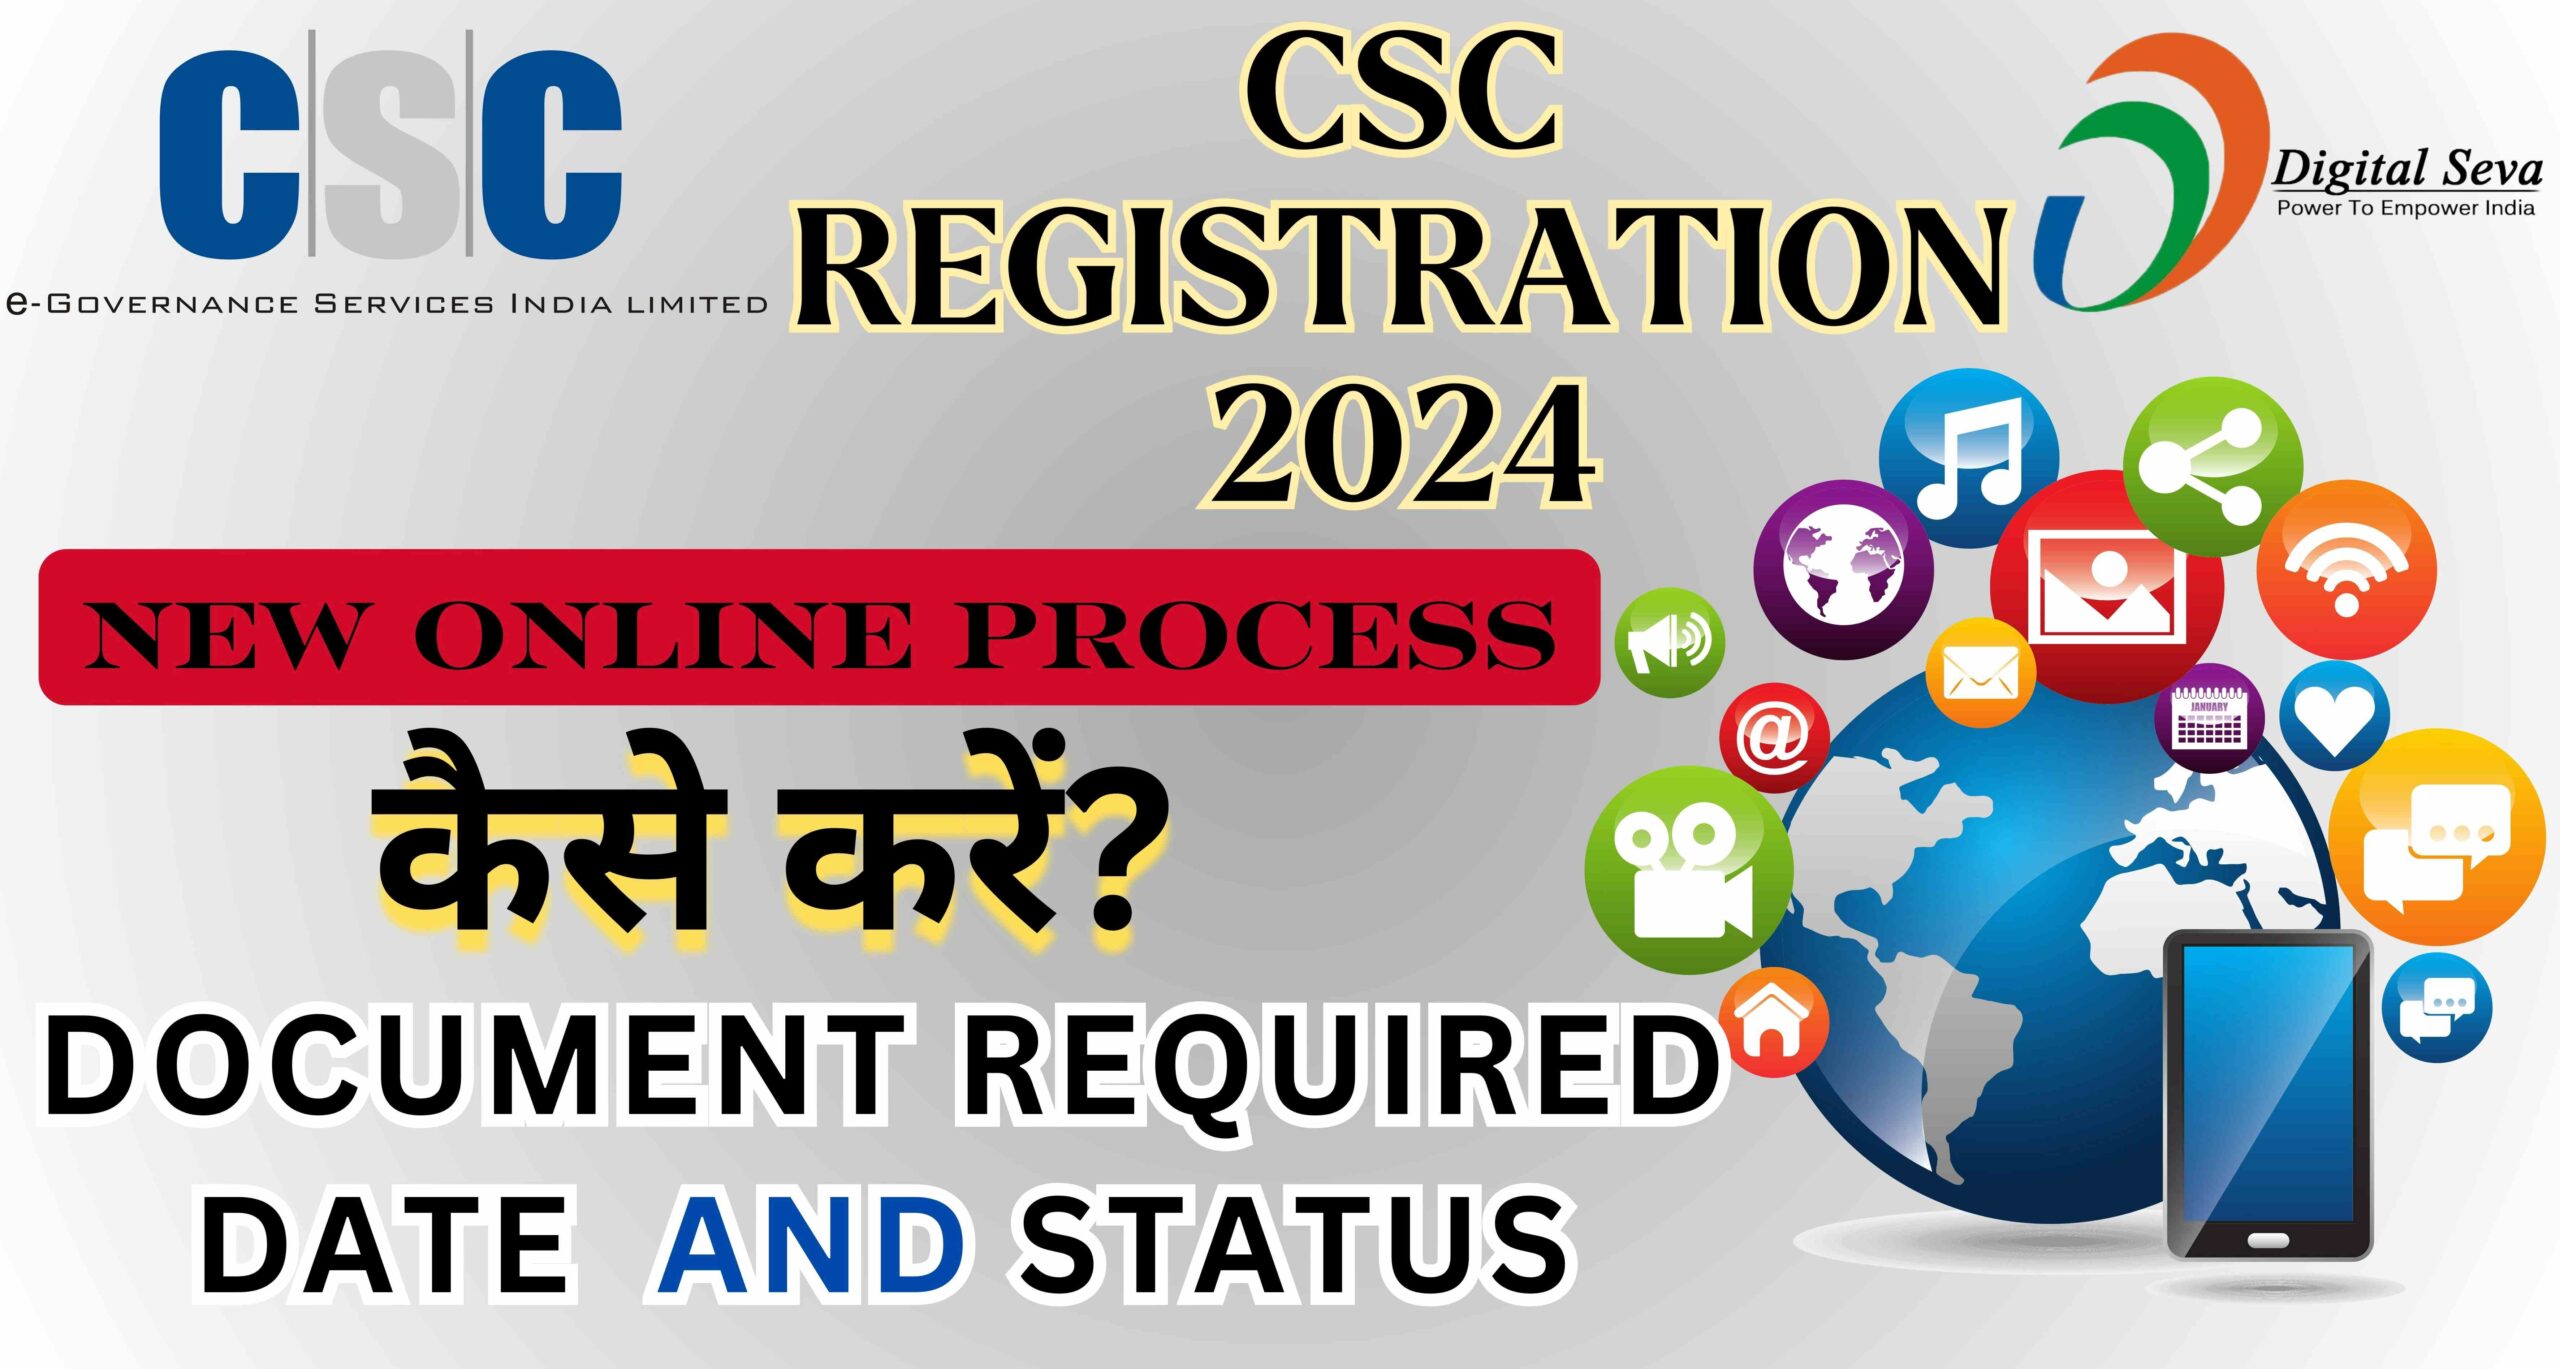 CSC REGISTRATION 2024 NEW ONLINE PROCESS KAISE KARE, DOCUMENT REQUIRED,DATE, AND STATUS